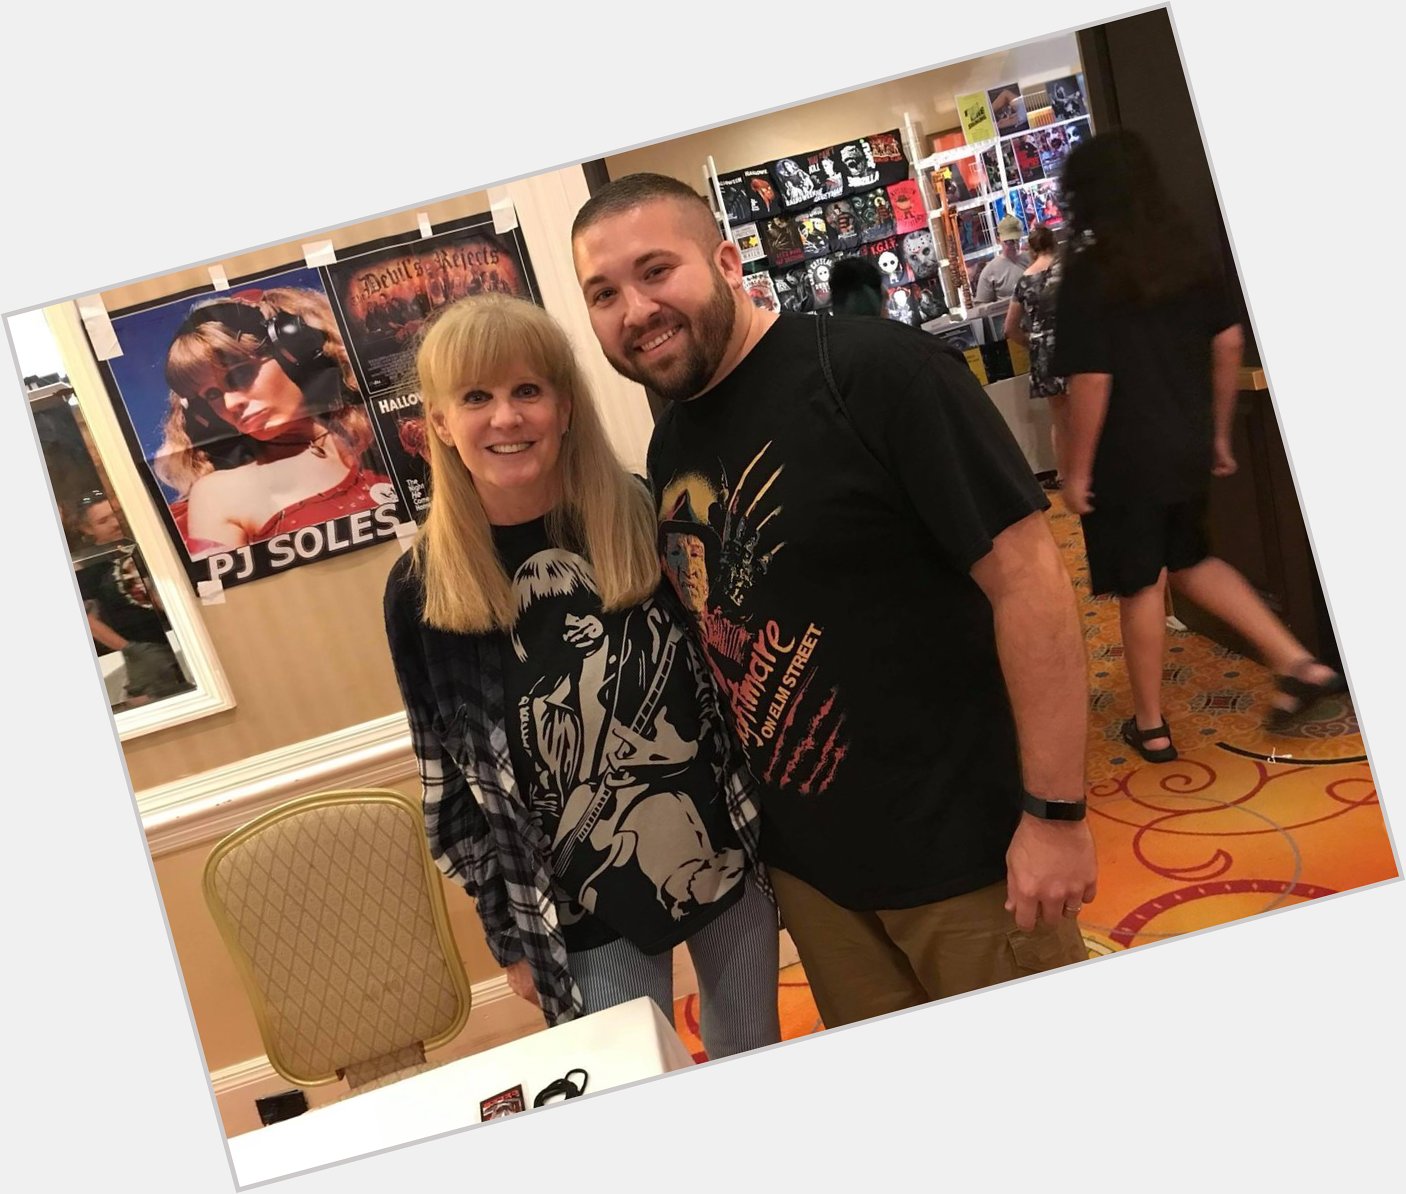 Happy 72nd birthday to one of my favorite celebrities to chat with, PJ Soles. She s TOTALLY rad. 